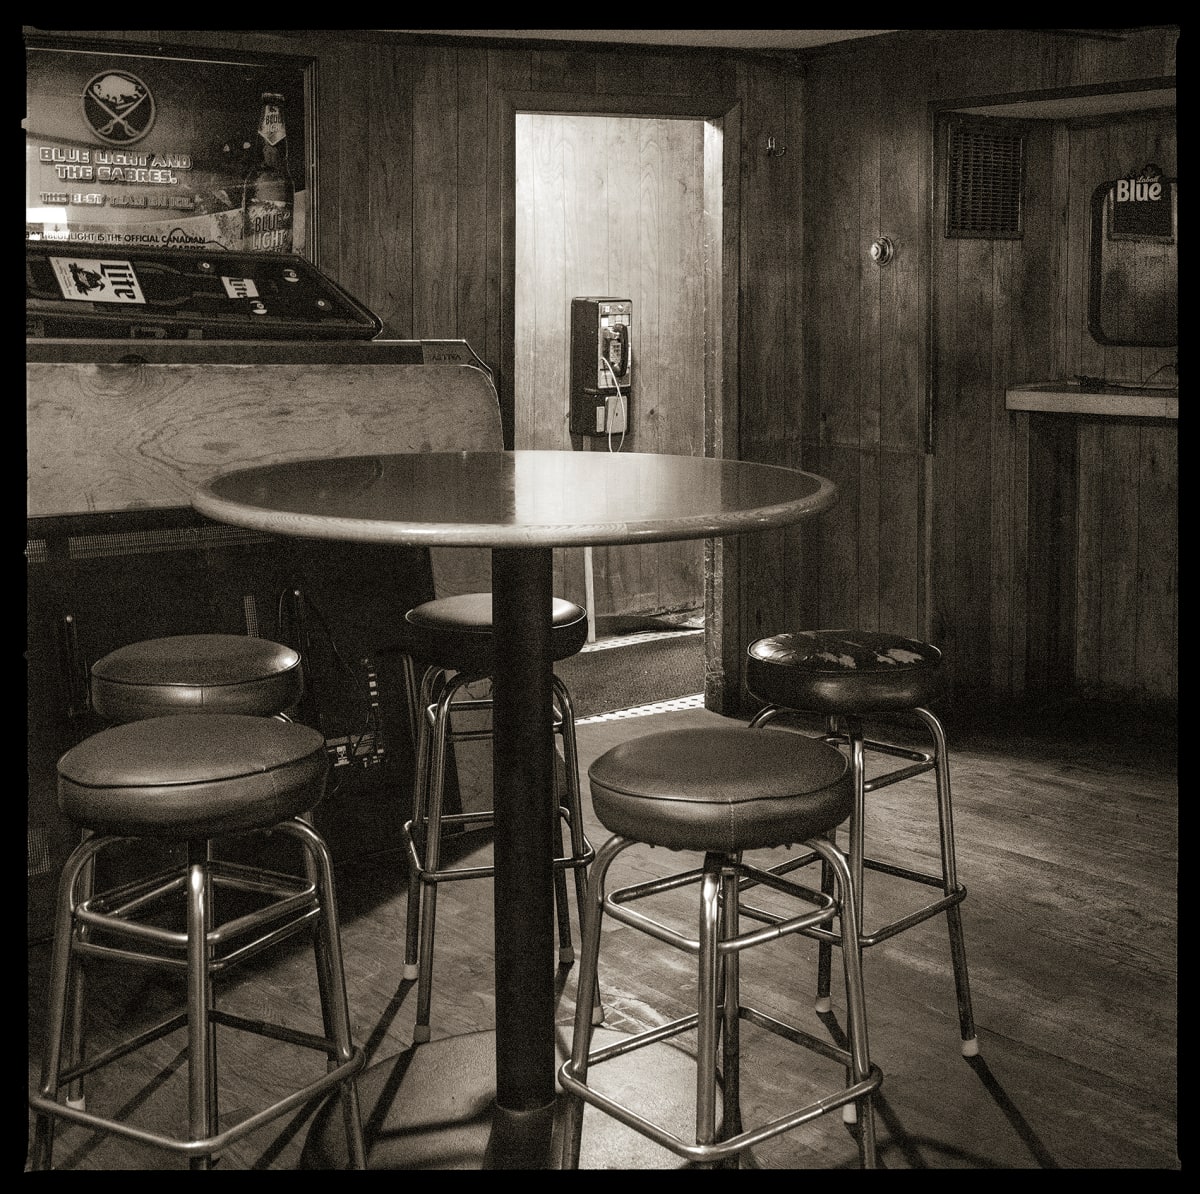 585.872.9919 – Coach’s Sports Bar, 19 West Main Street, Webster, NY 14580 by Eric T. Kunsman  Image: ID: A black and white image shows a payphone in a back closet of a bar.  In front of the payphone, there is a circular table with five bar stools around it.  The loser light is on, making the payphone visible.